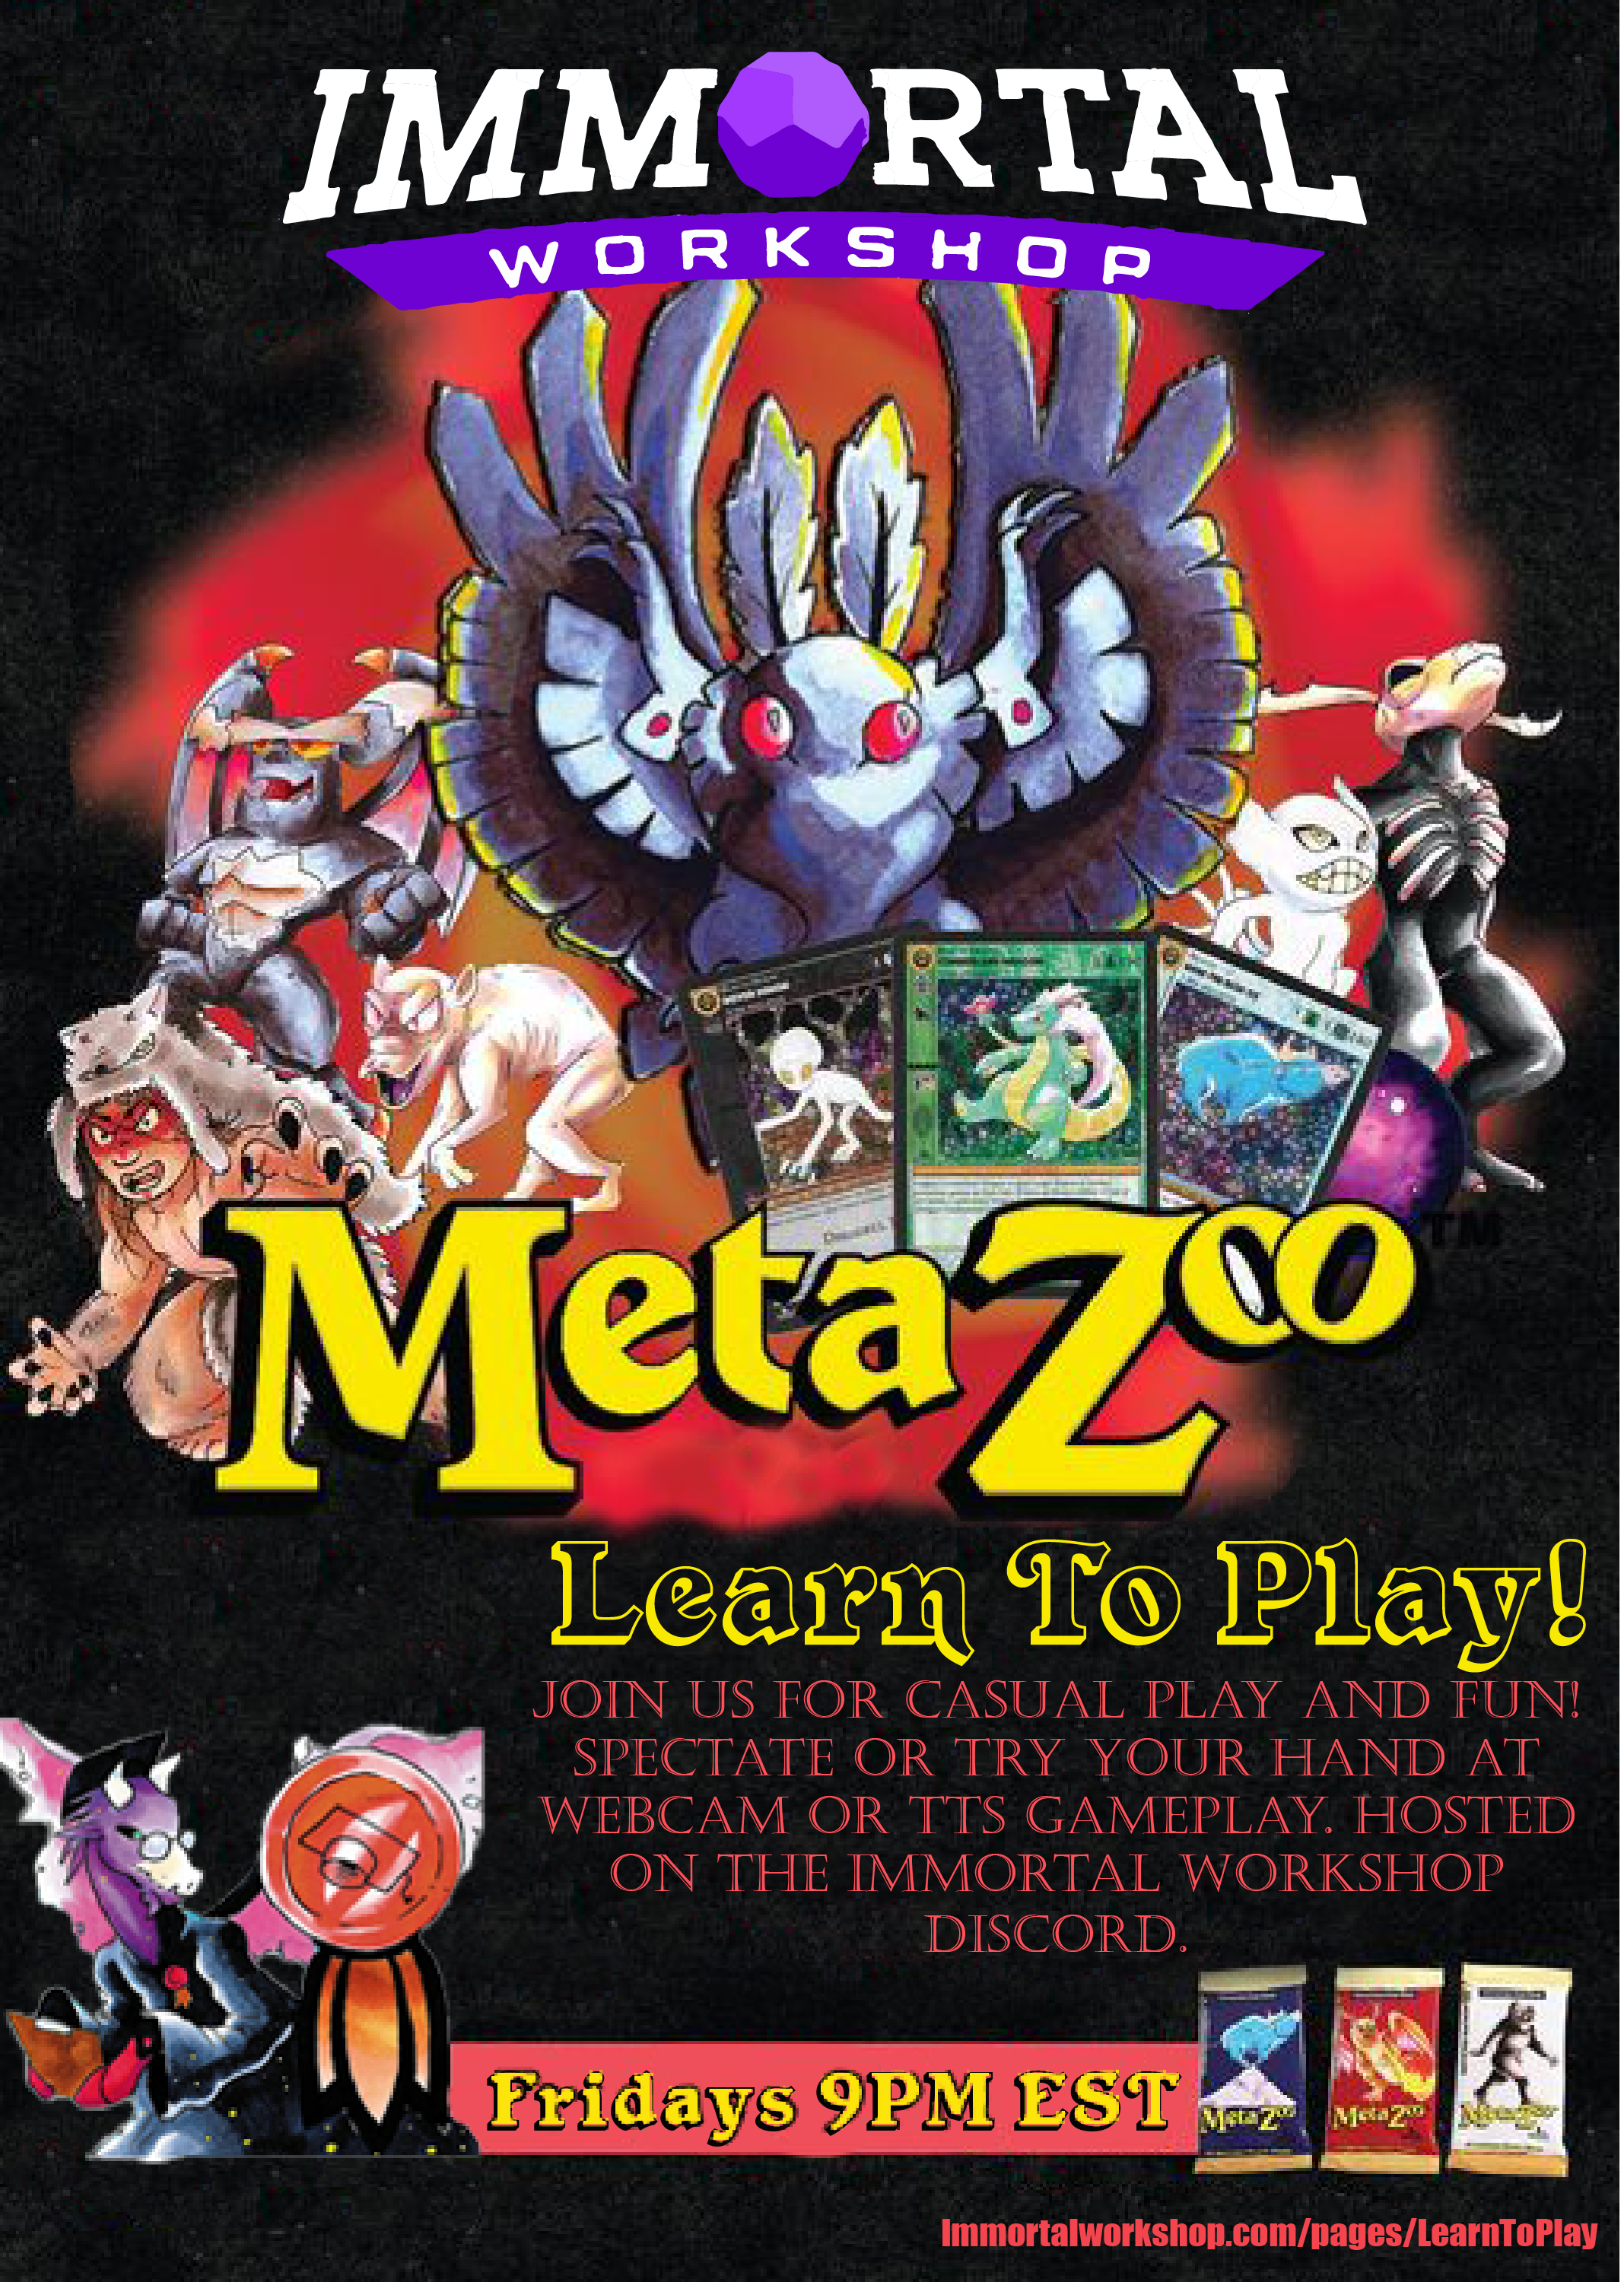 Friday Night MetaZoo Online Learn-To-Play Events!